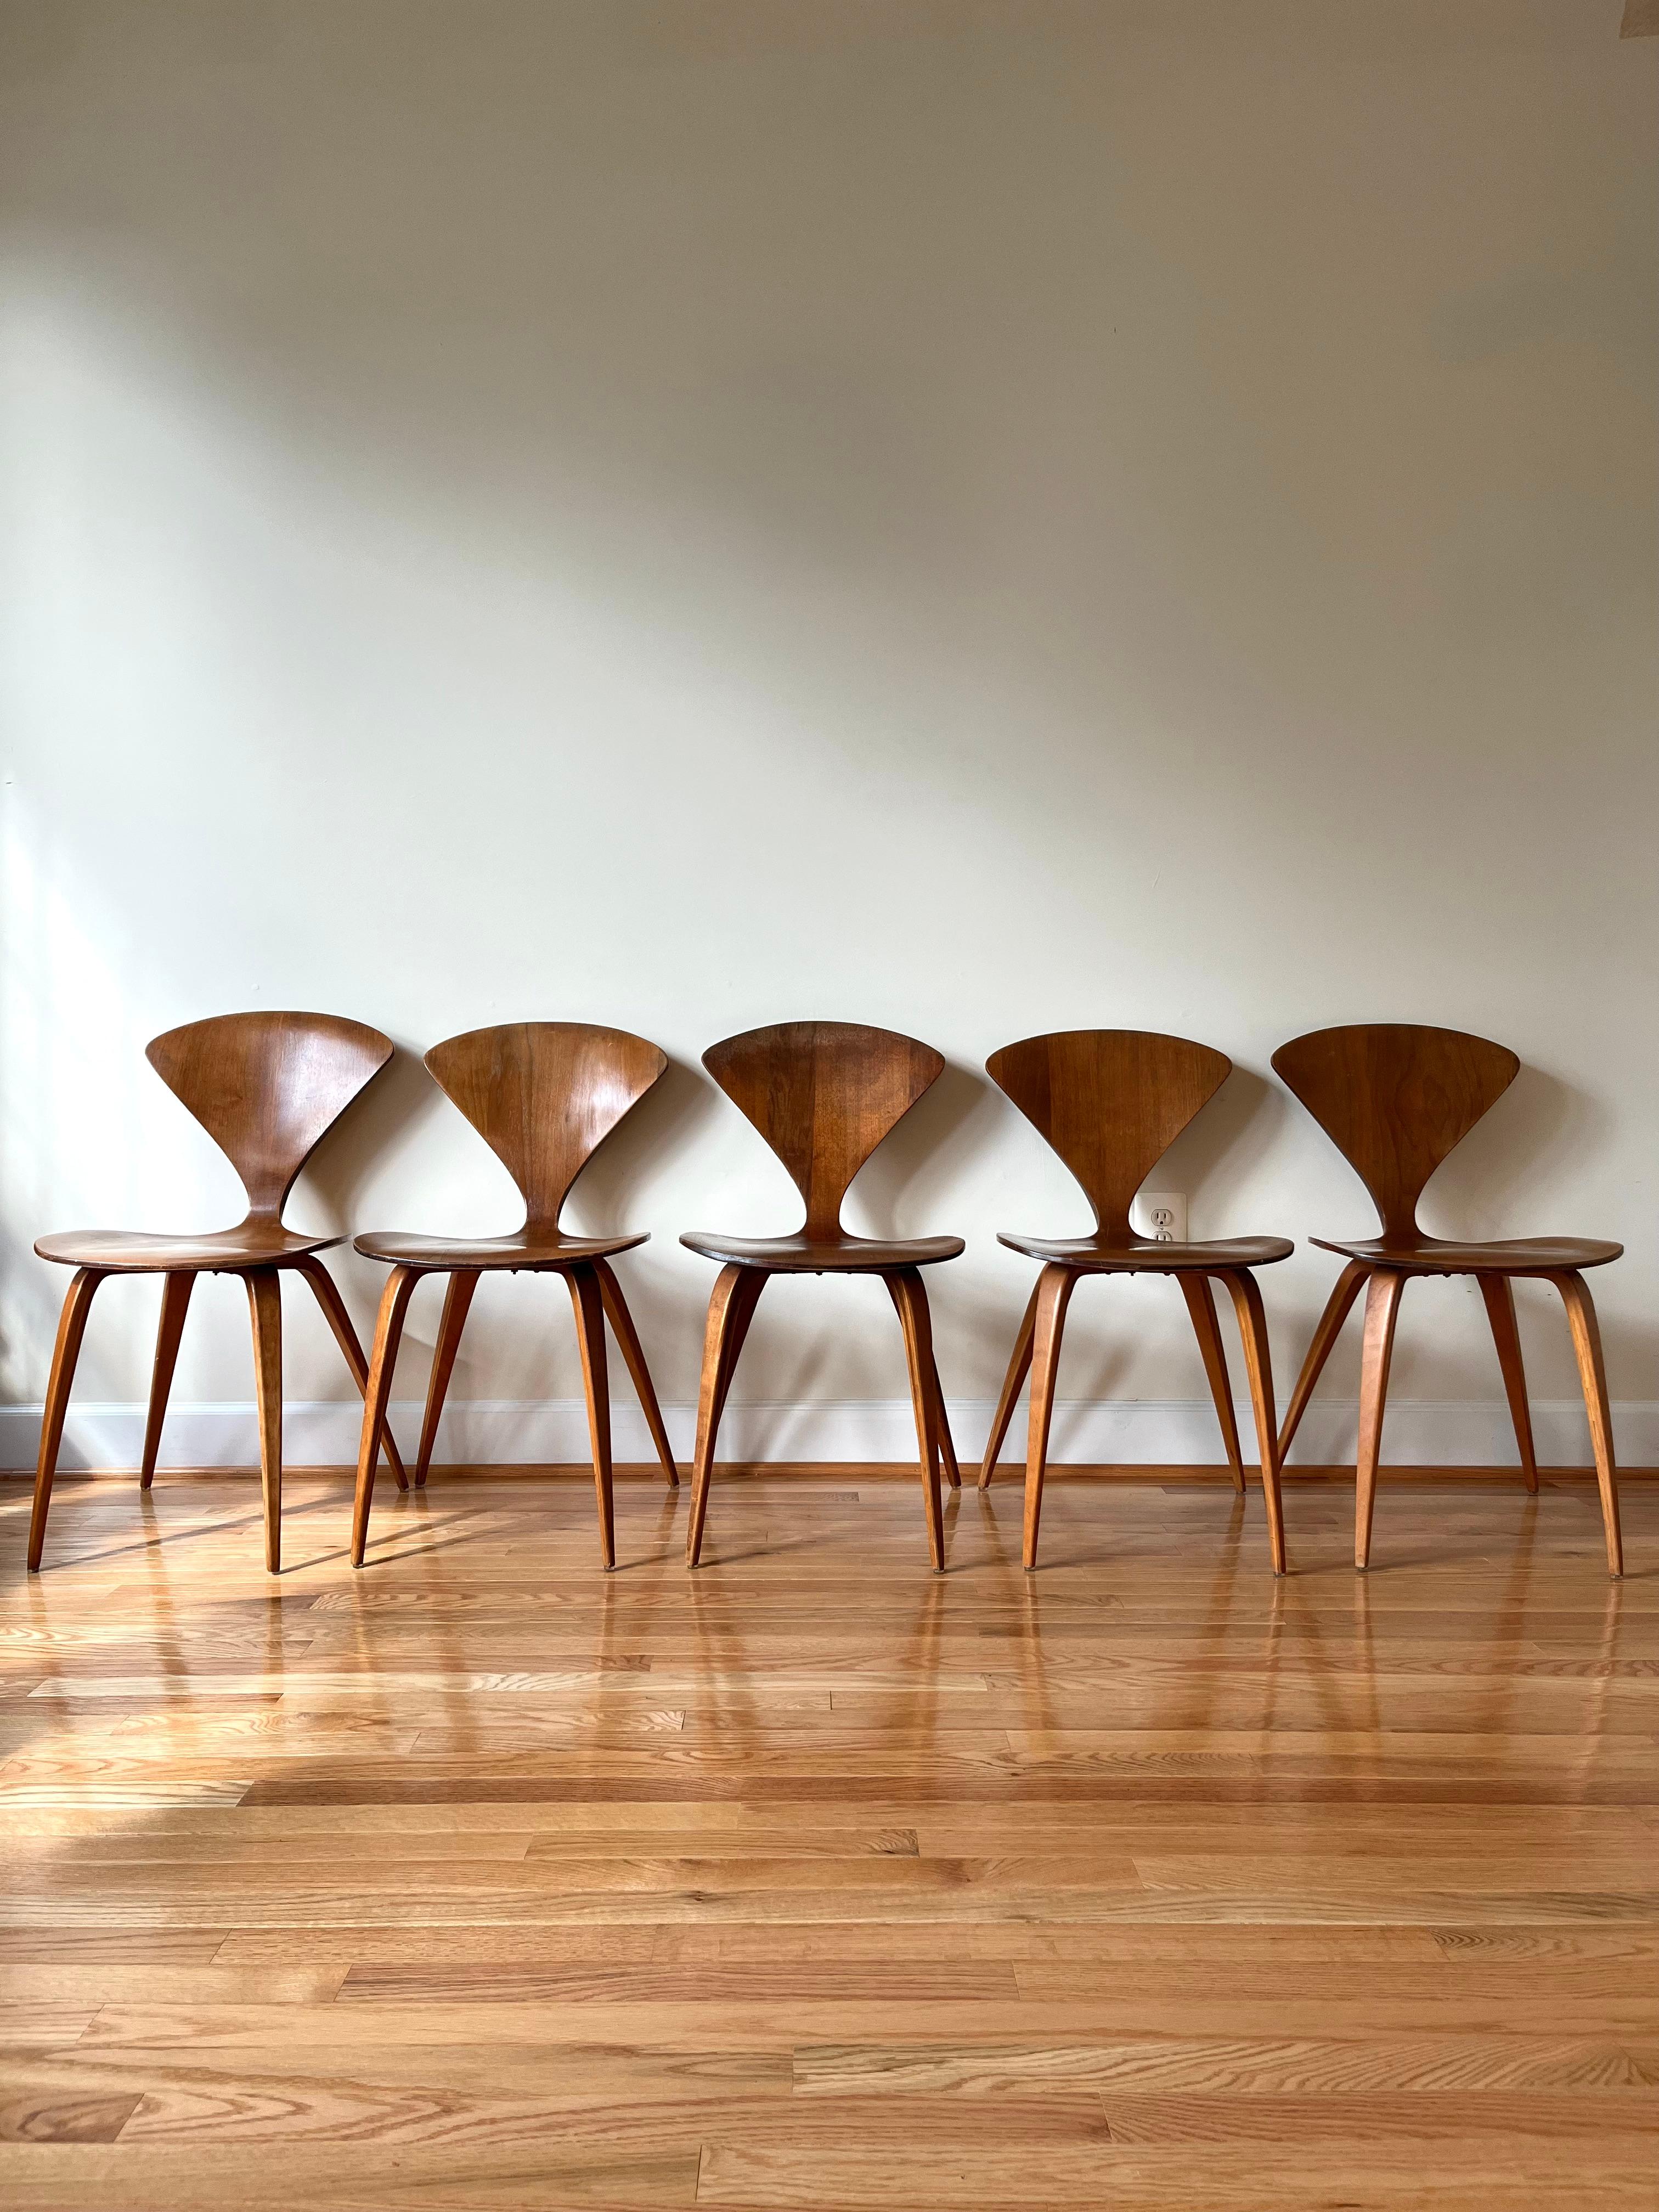 Iconic dining chairs designed by Norman Cherner for Plycraft in the United States in 1958. 

This set of five dining chairs are an early model of Cherner design with original condition.

Originally designed to make mid-century modern design